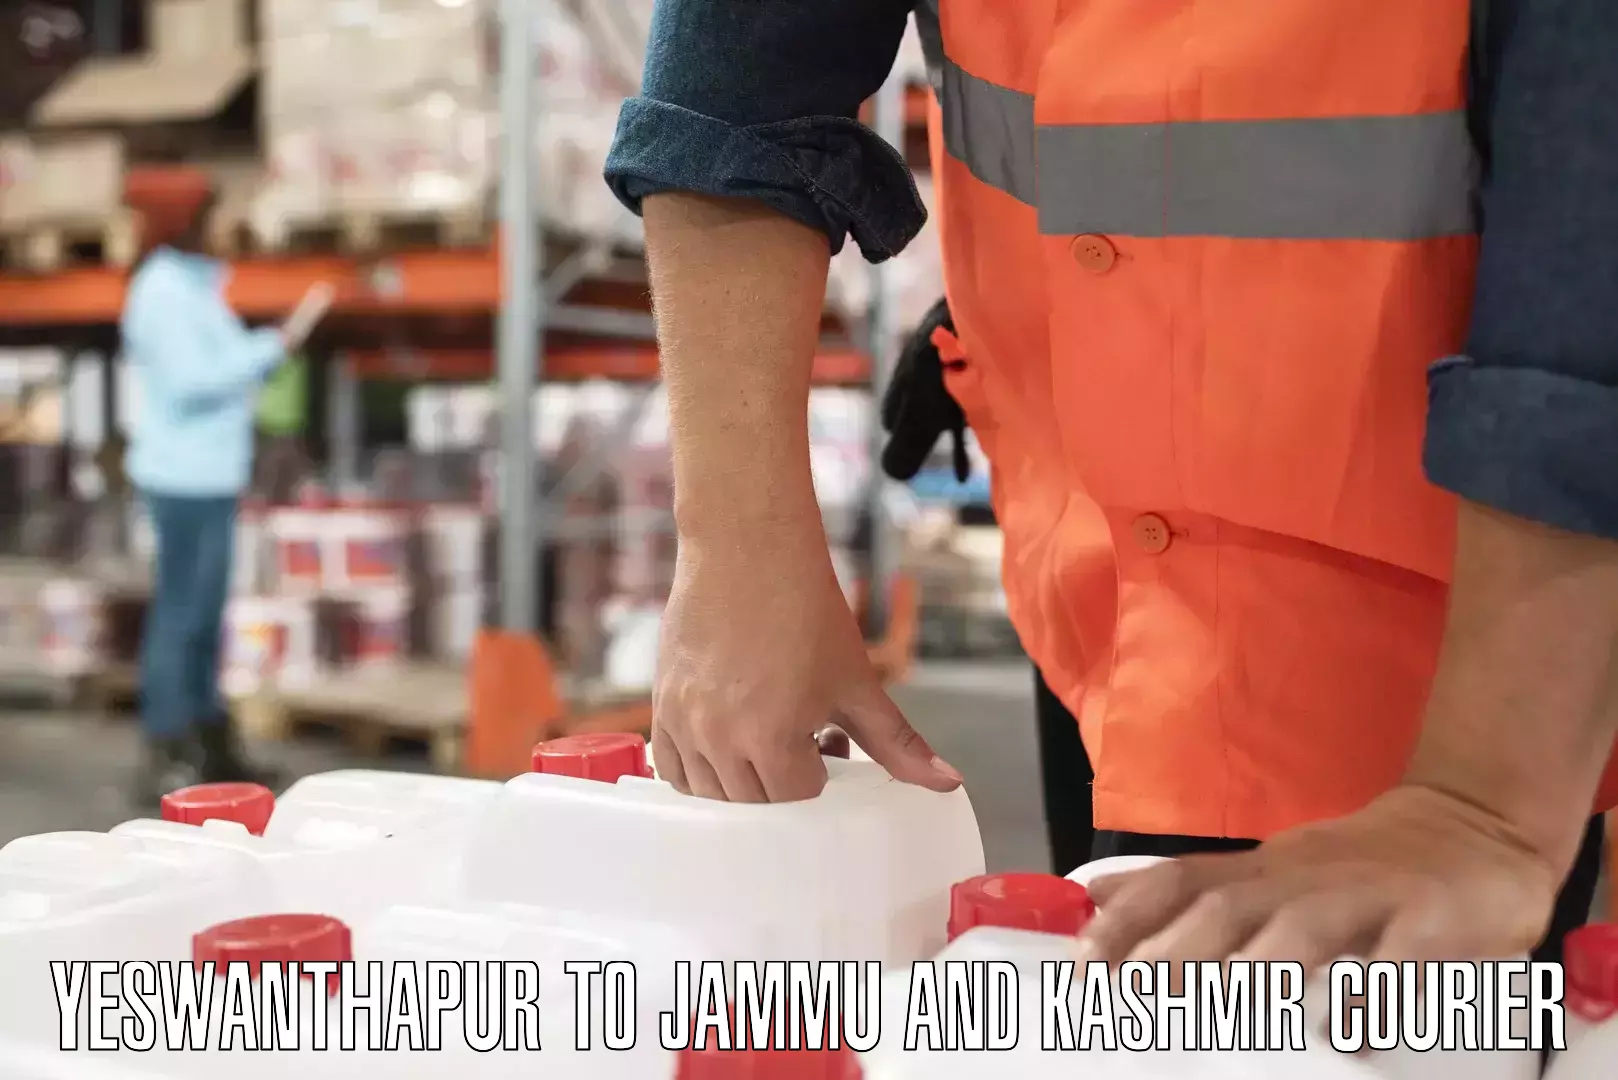 Reliable delivery network Yeswanthapur to Jammu and Kashmir